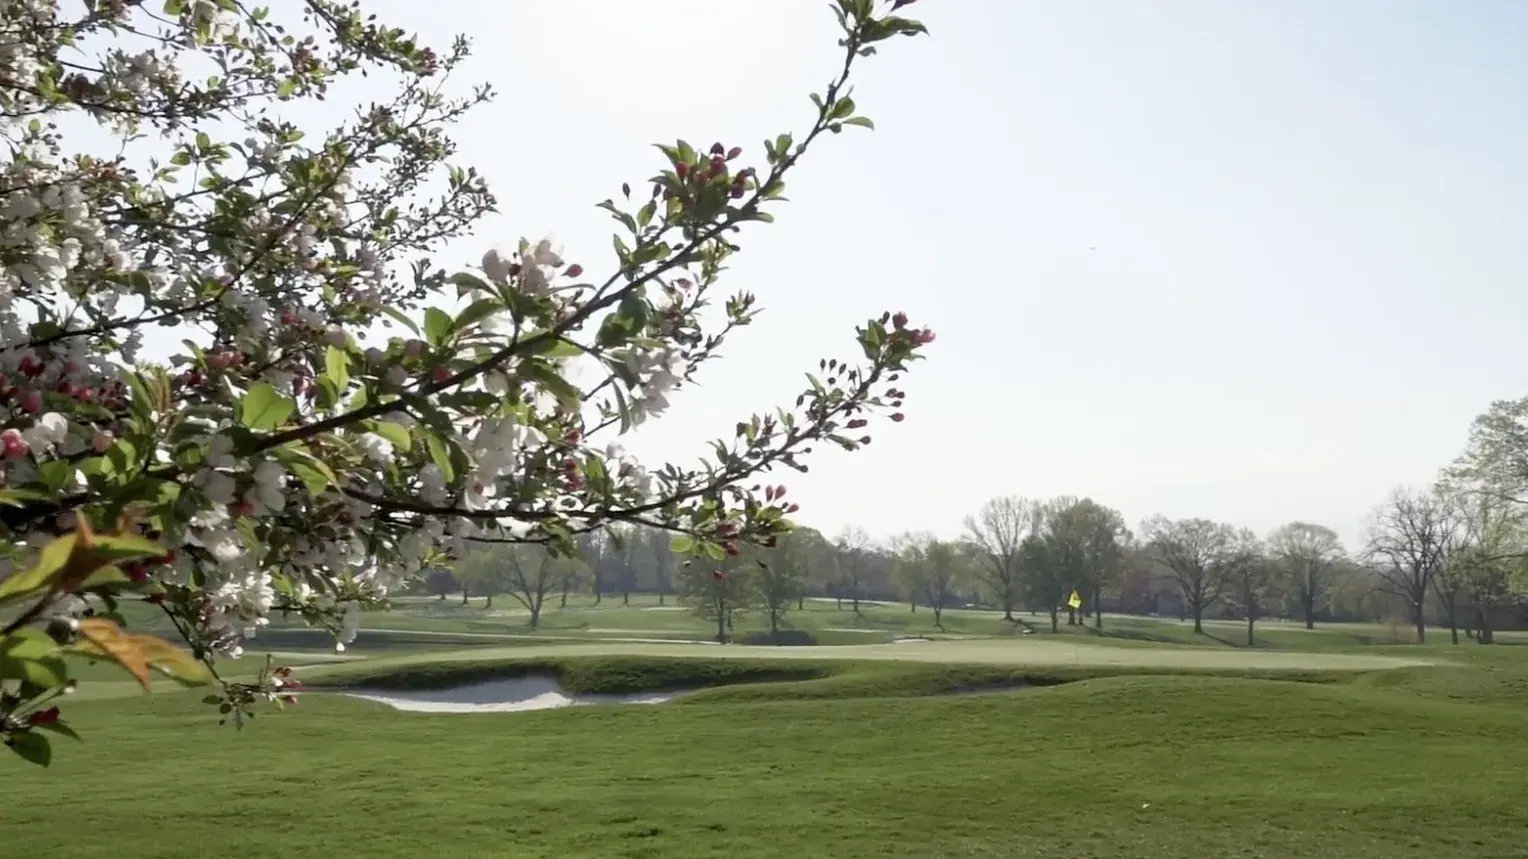 view of a golf course from behind a flowering tree